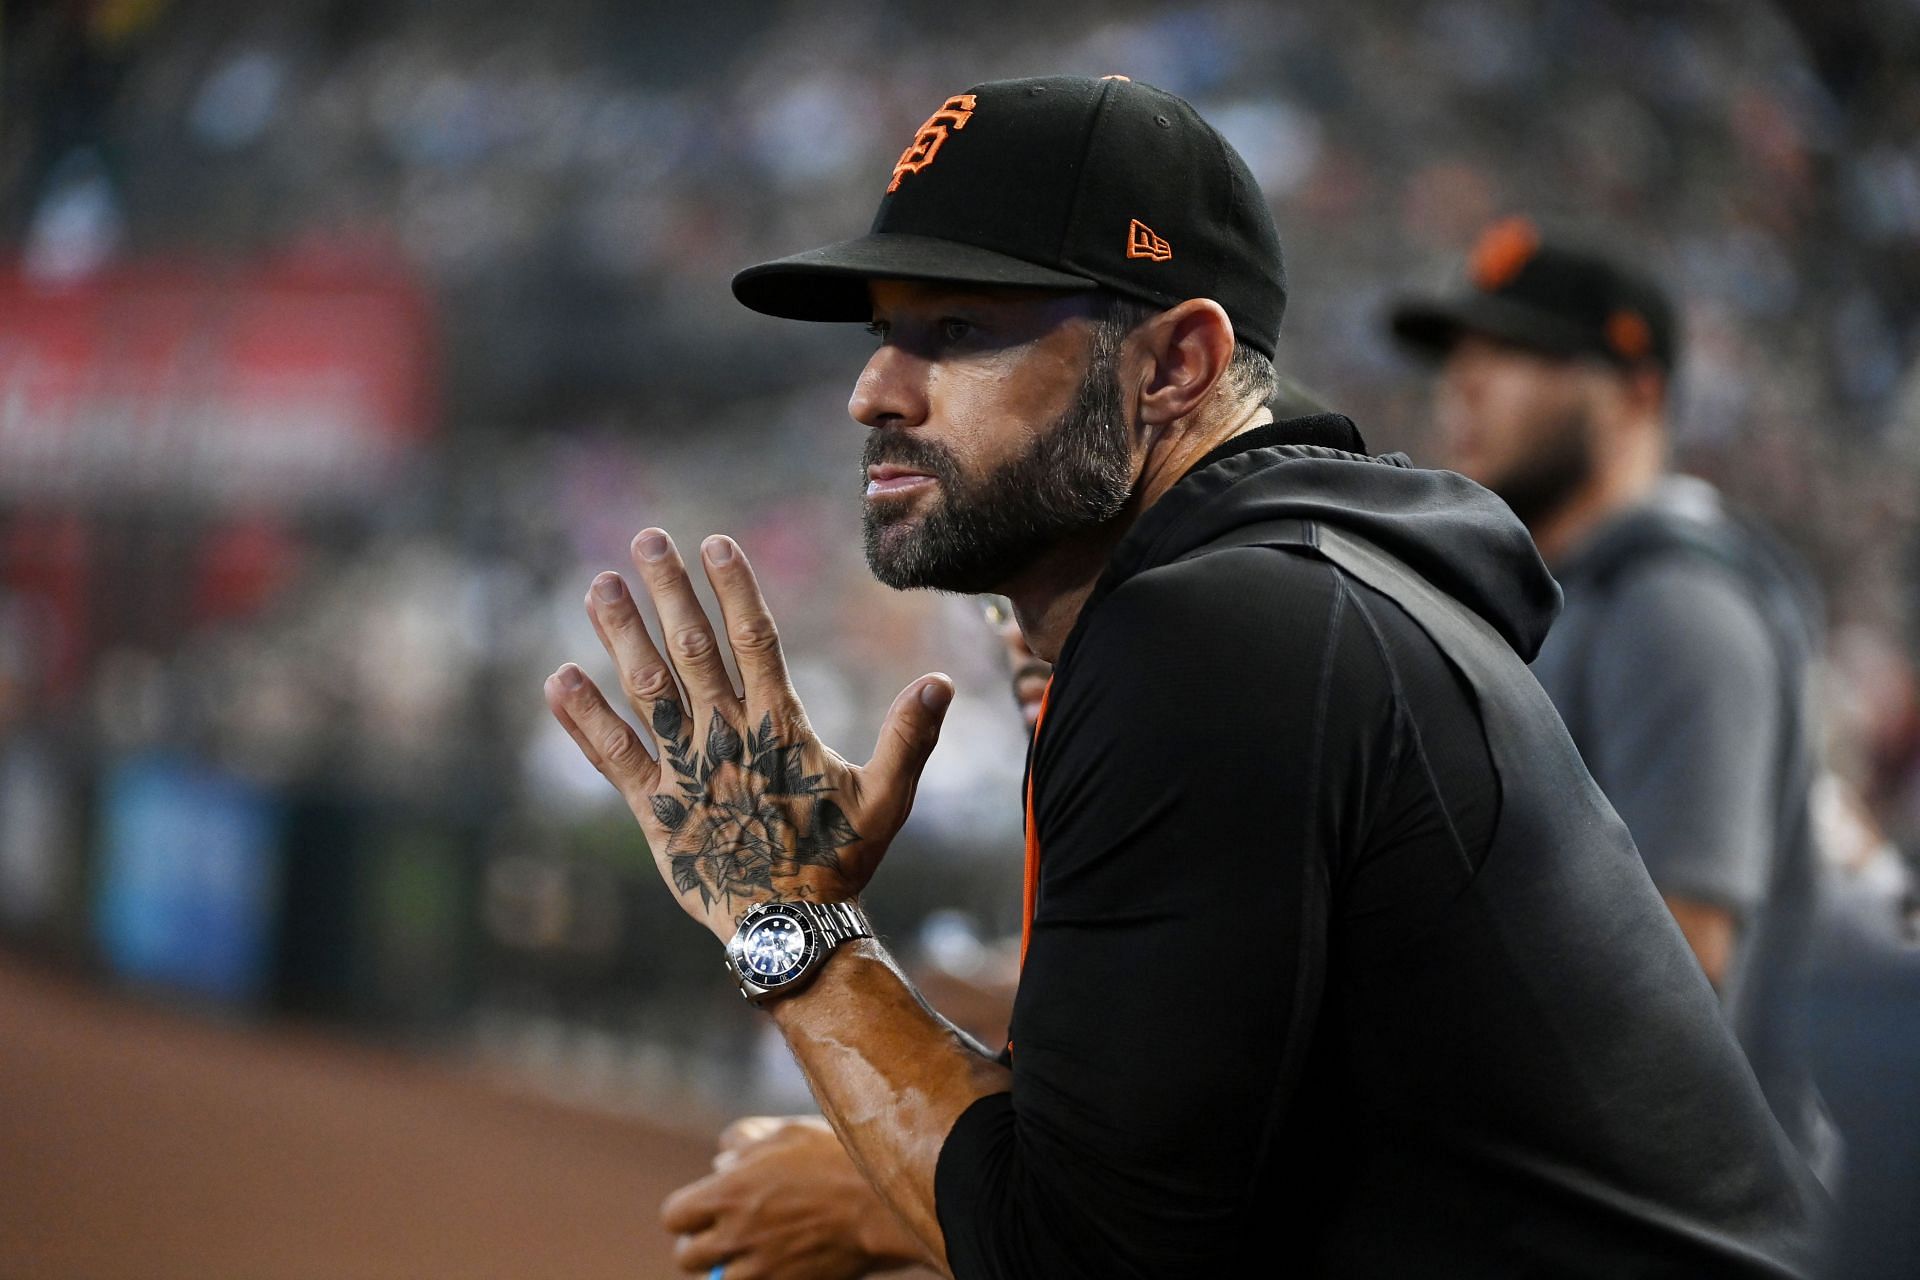 San Francisco Giants fans dejected by shutout loss to New York